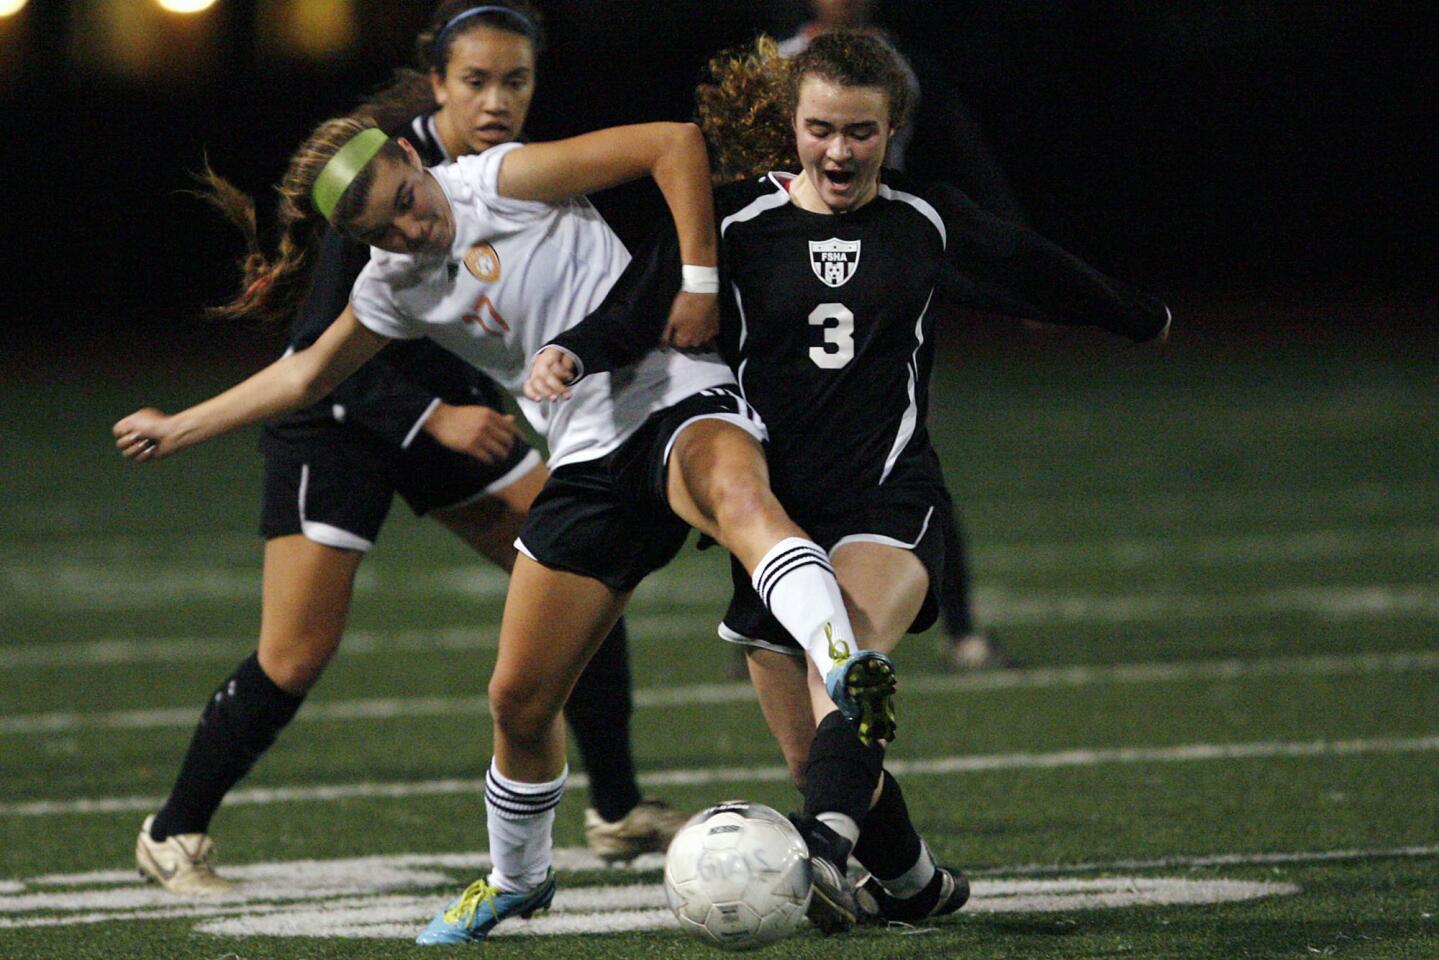 South Pasadena's Ryan Ramirez, left, and FSHA's Lauren Savo fight for the ball during a game at South Pasadena High School on Thursday, December 13, 2012.